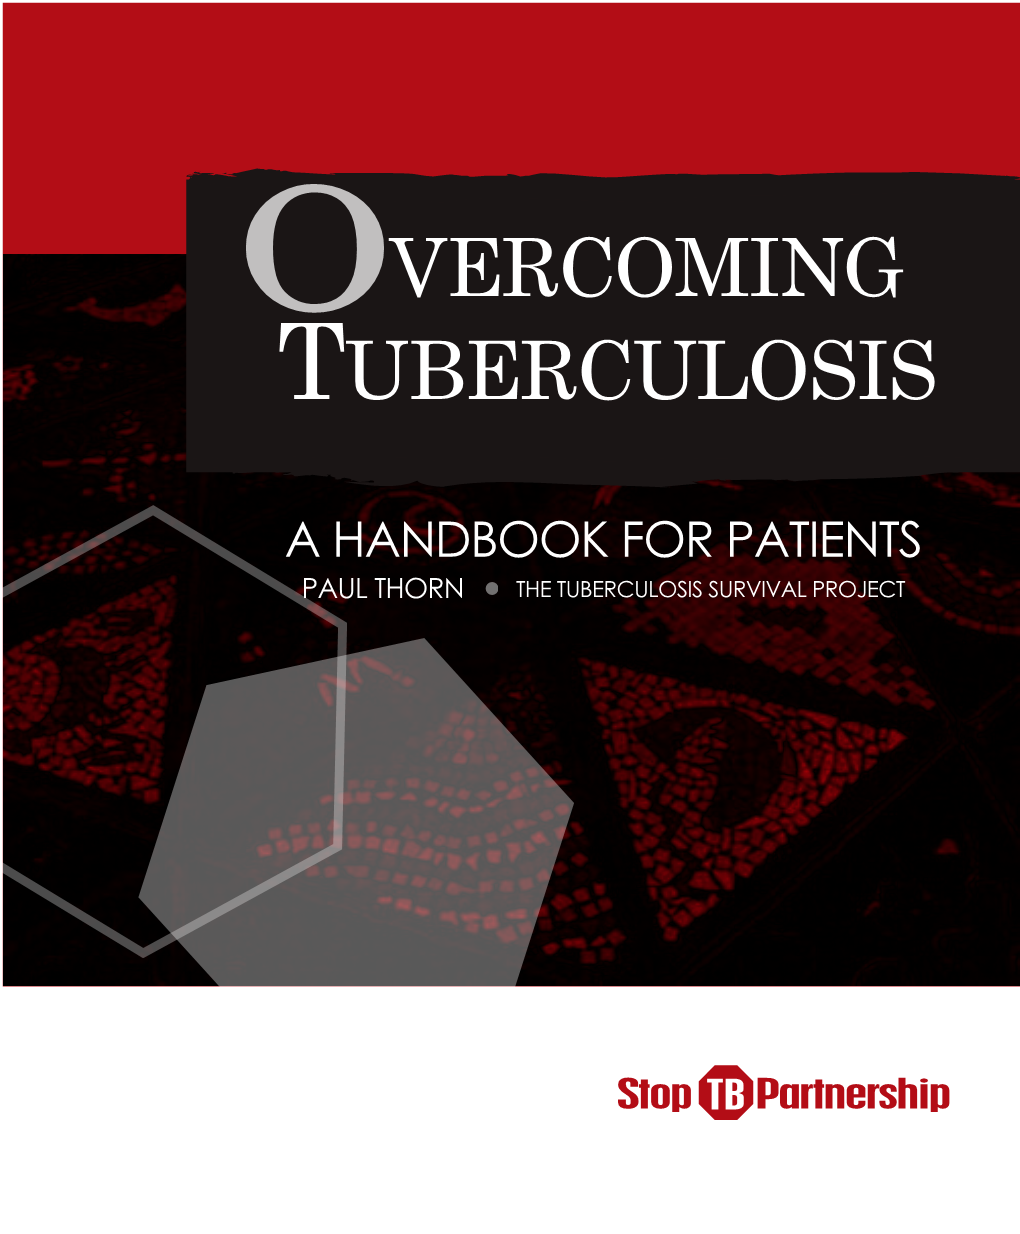 OVERCOMING TUBERCULOSIS: a Handbook for Patients